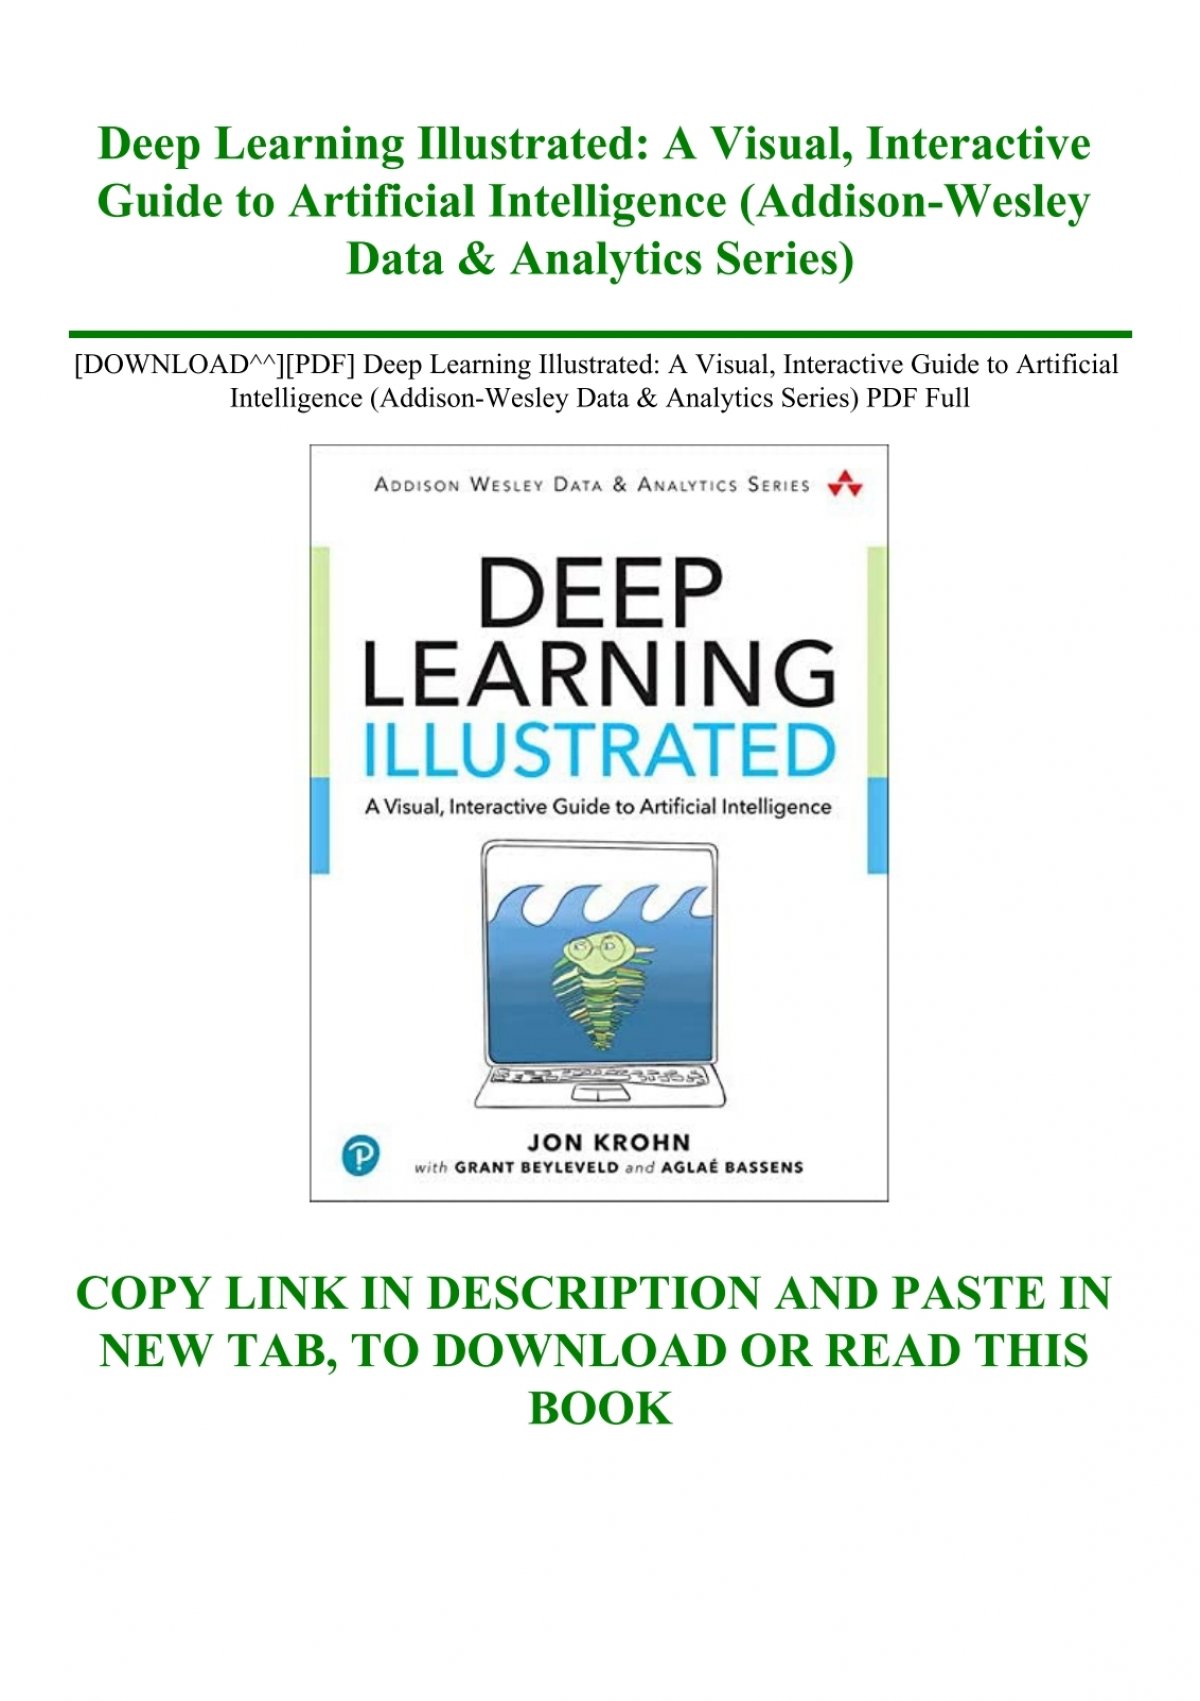 deep learning illustrated pdf free download